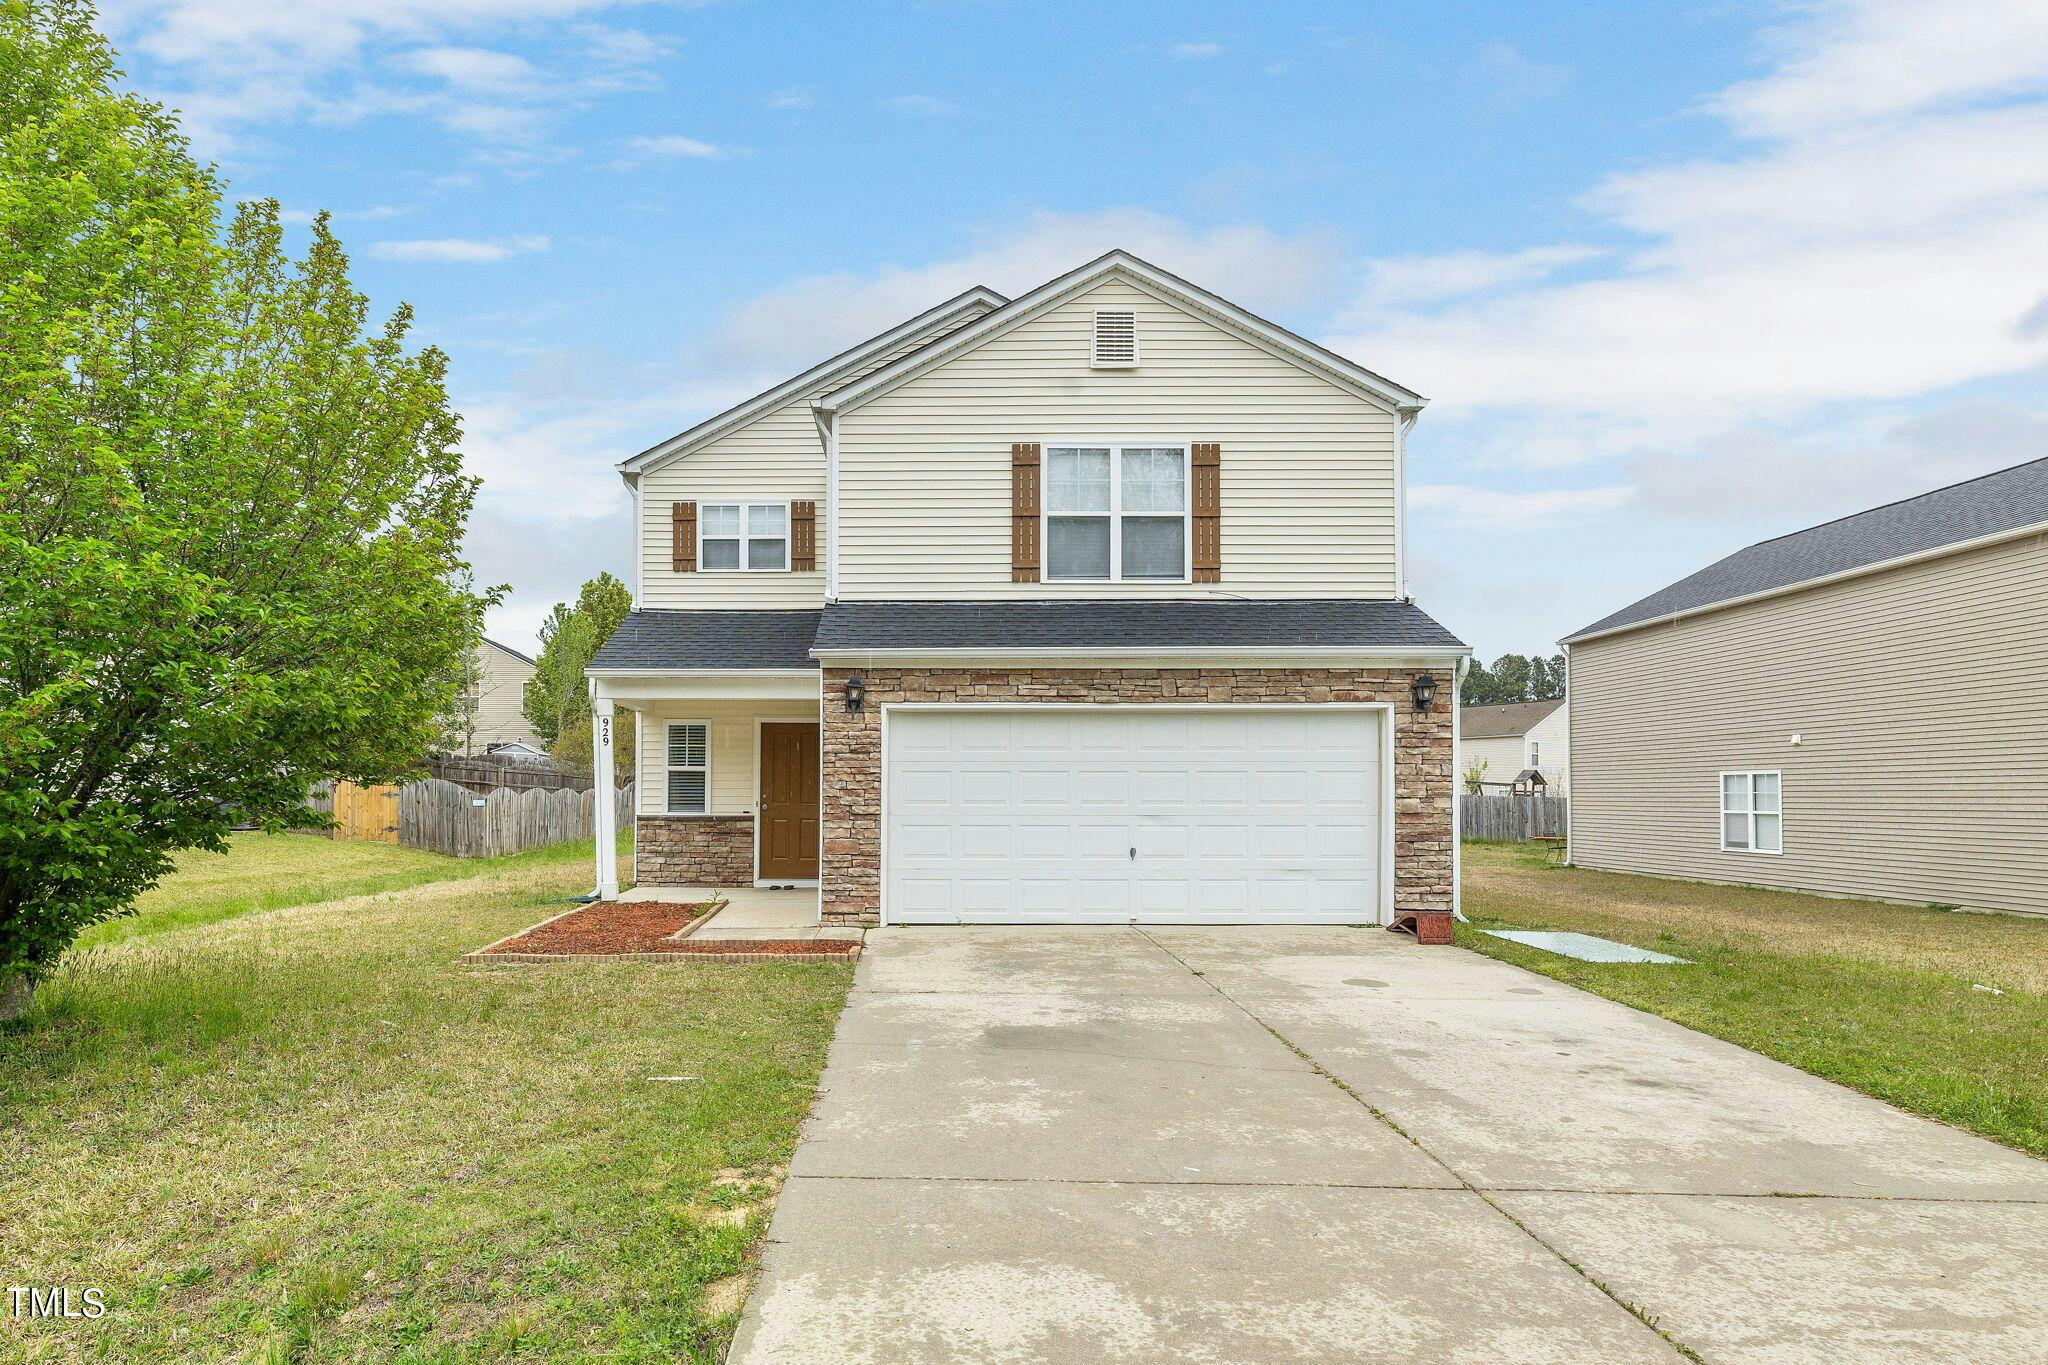 929 Mailwood Drive Knightdale_JRKnowles_